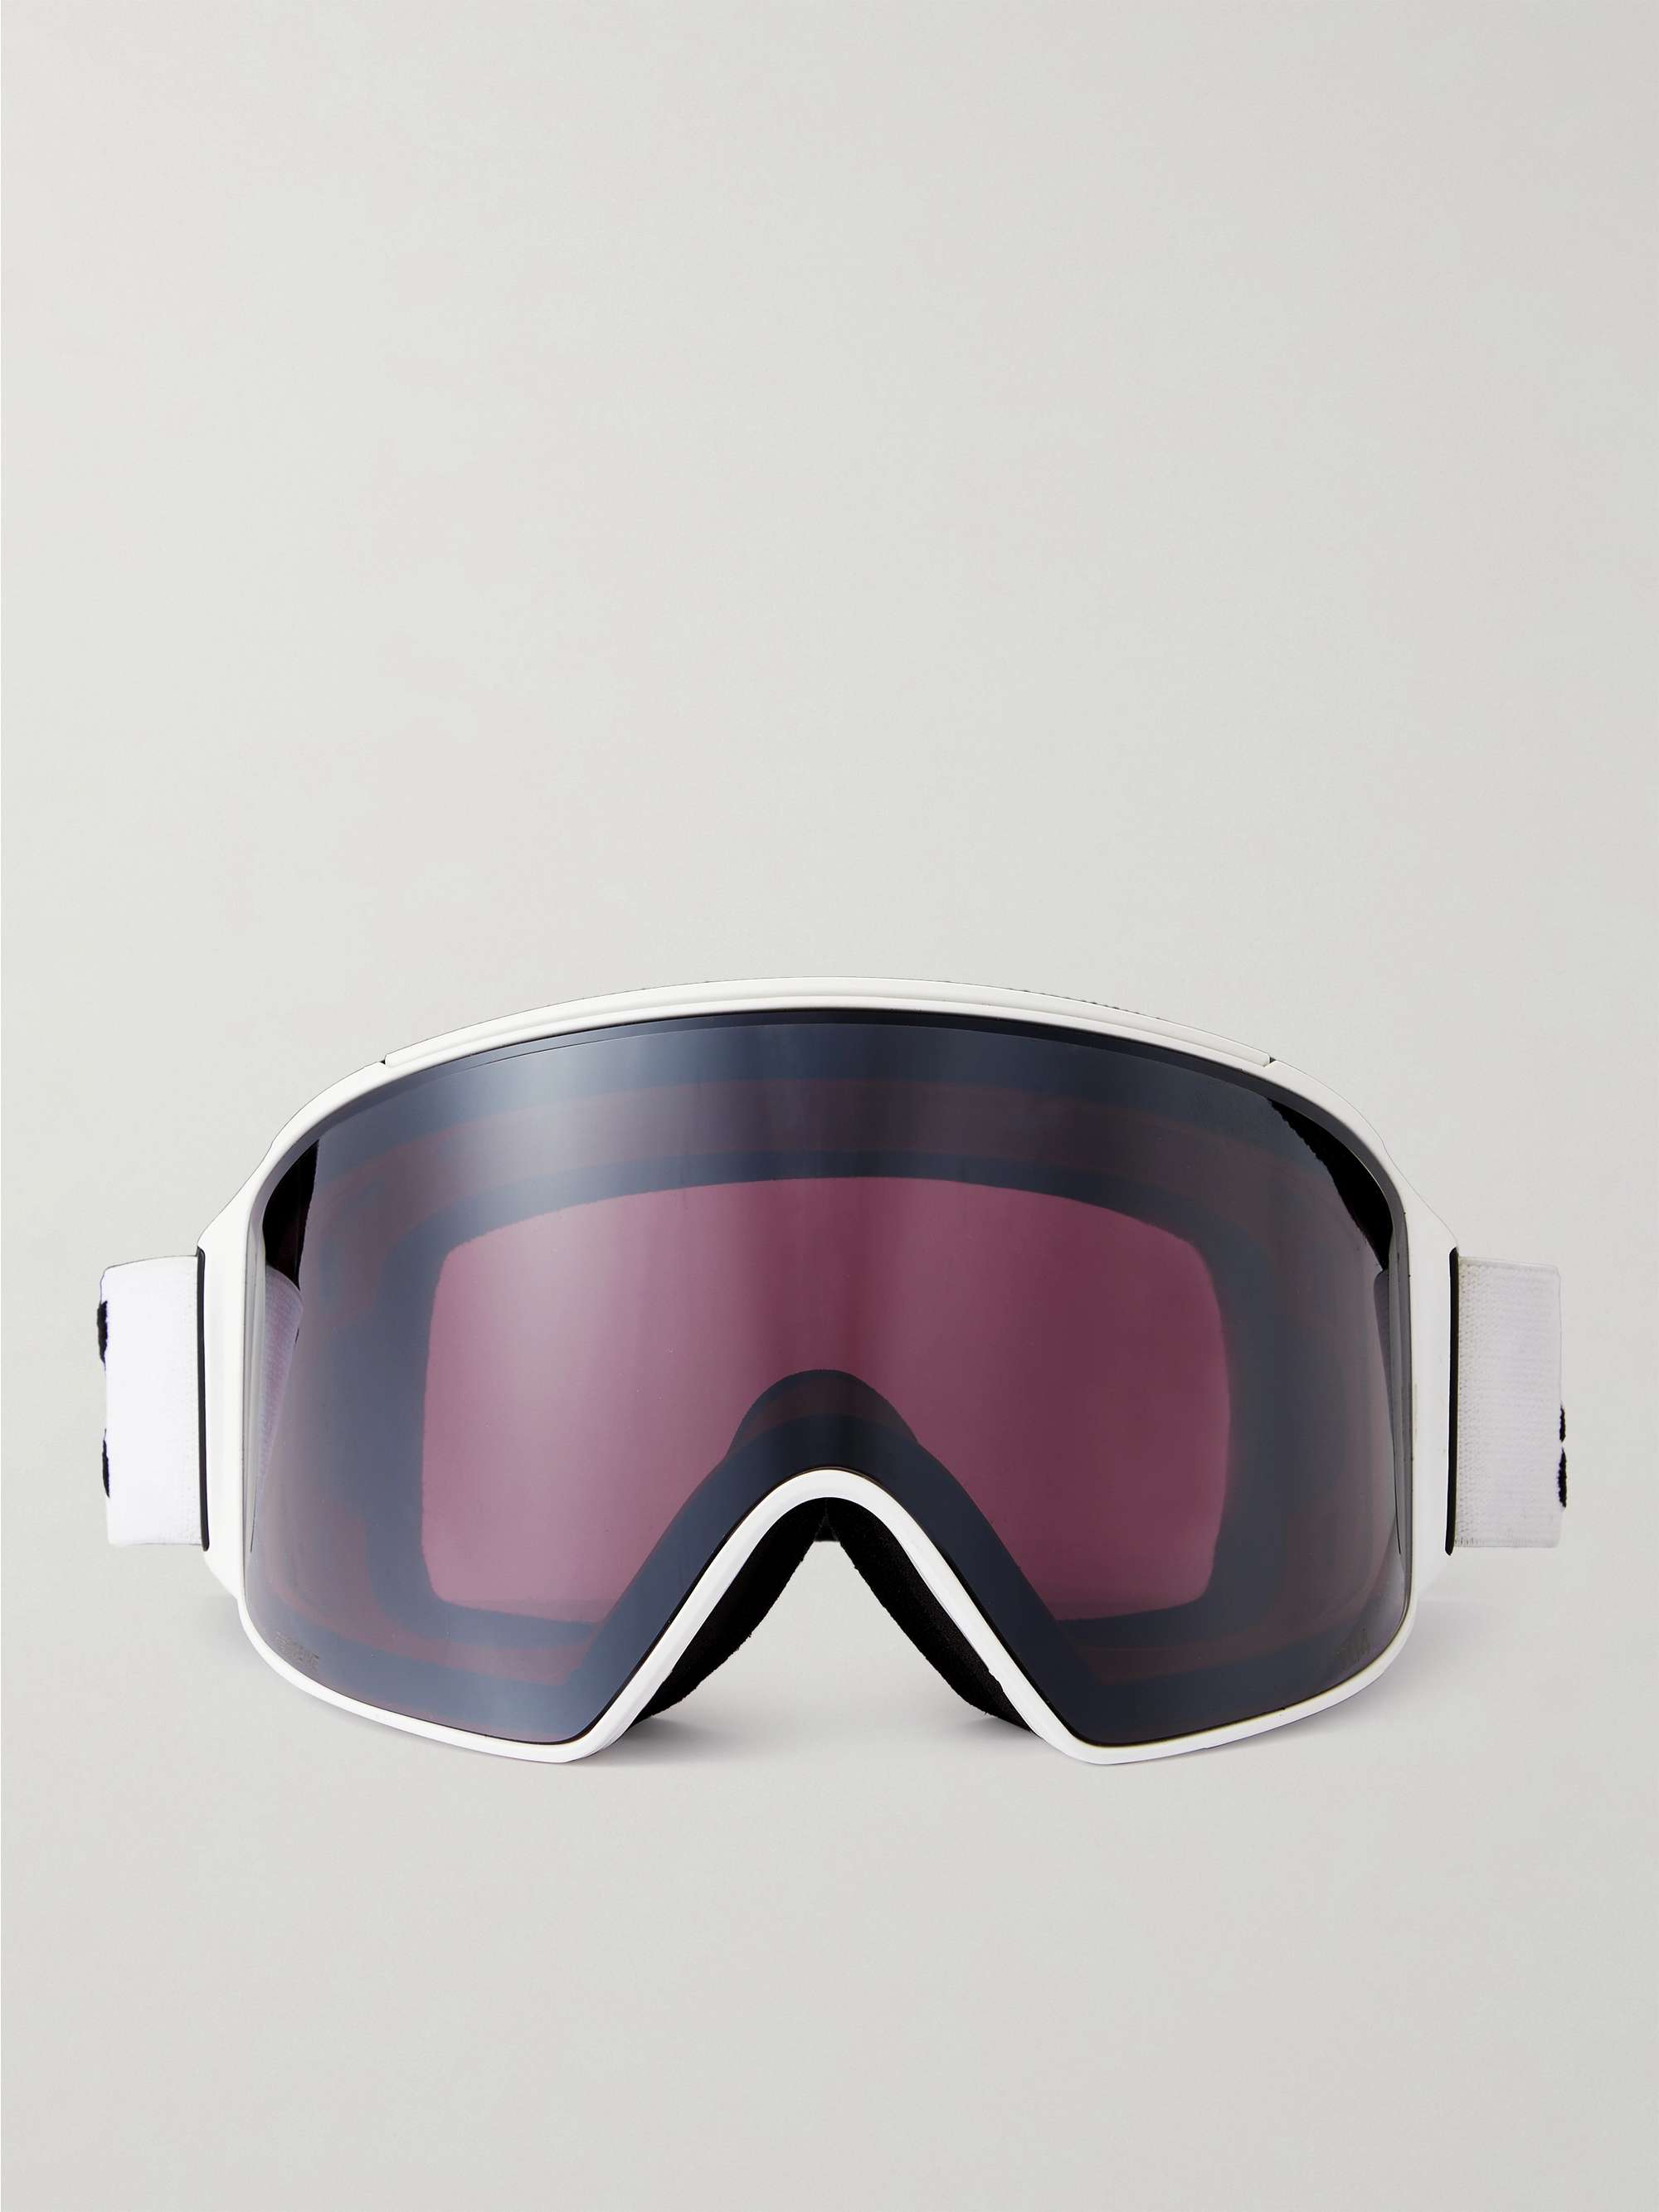 ANON M4 Cylindrical Ski Goggles and Stretch-Jersey Face Mask for Men